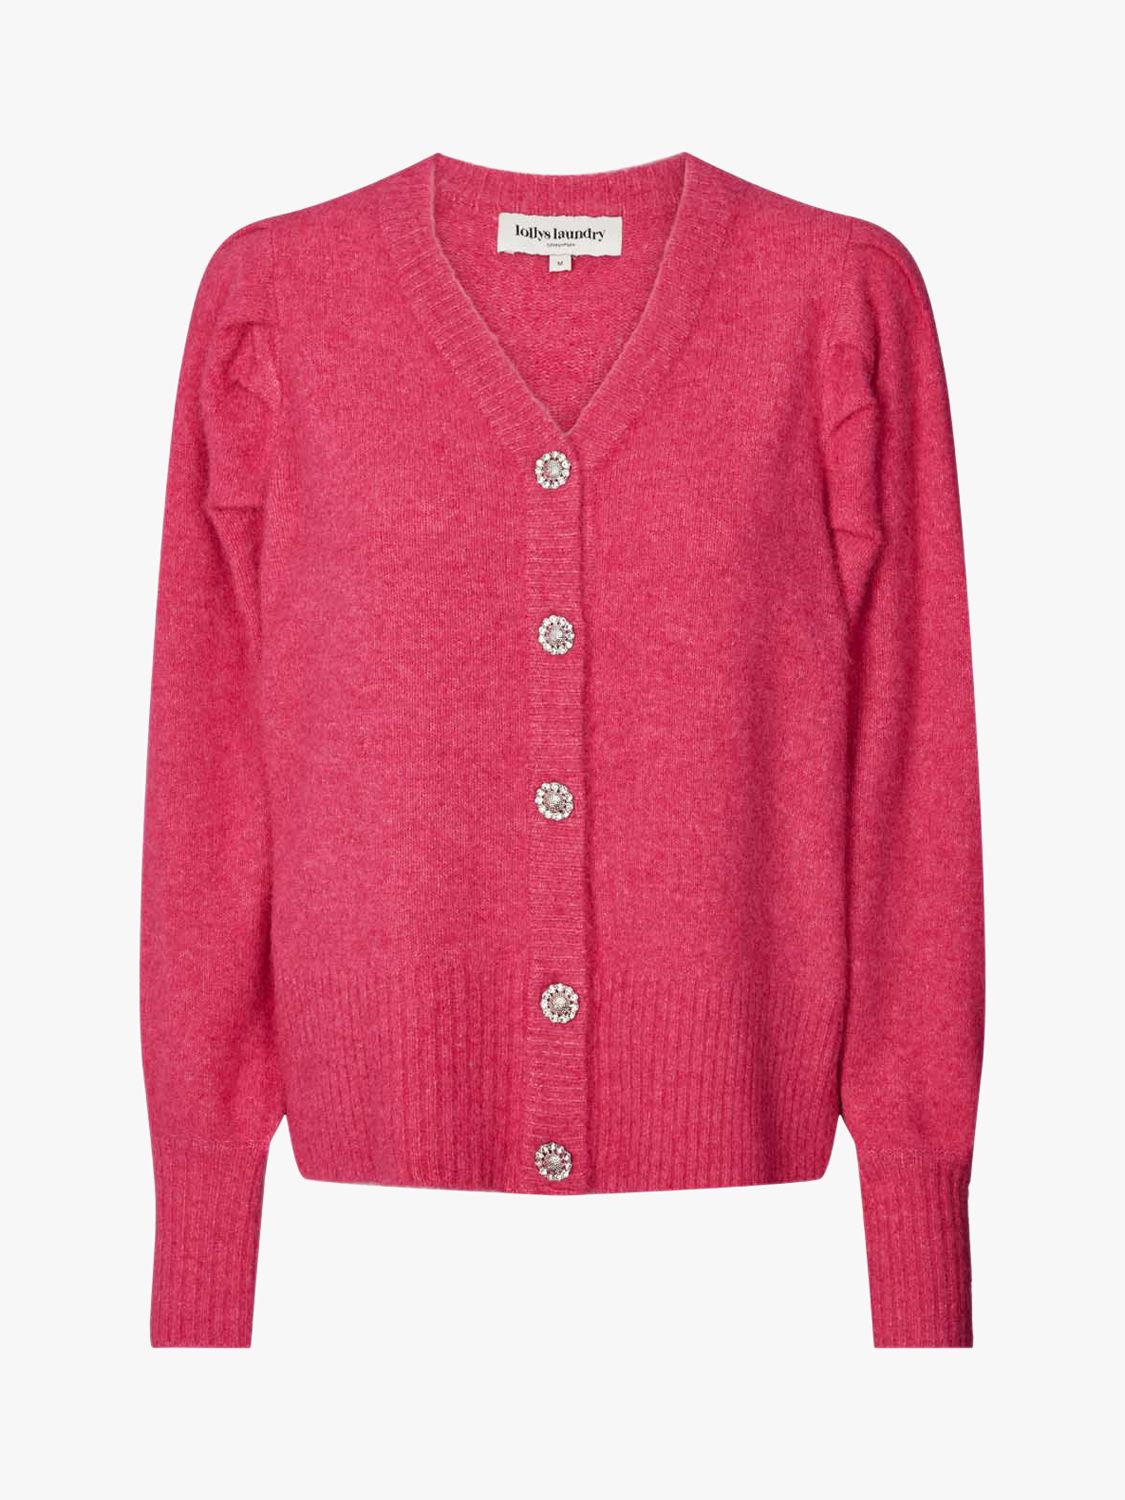 Lollys Laundry Laura V-Neck Cardigan, Pink at John Lewis & Partners